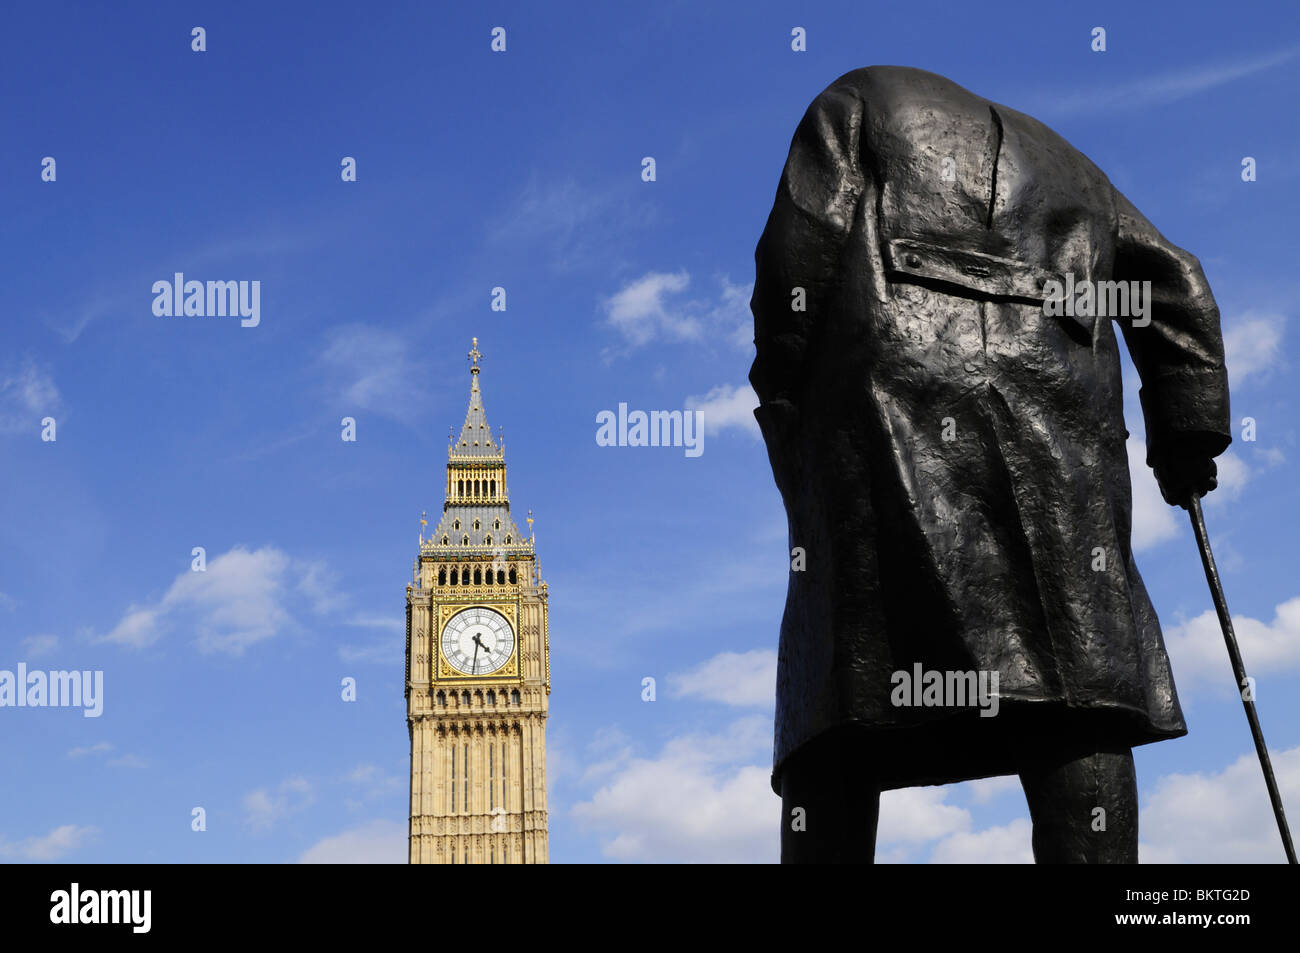 Statue of Sir Winston Churchill and Big Ben, Parliament Square, Westminster, London, England, UK Stock Photo